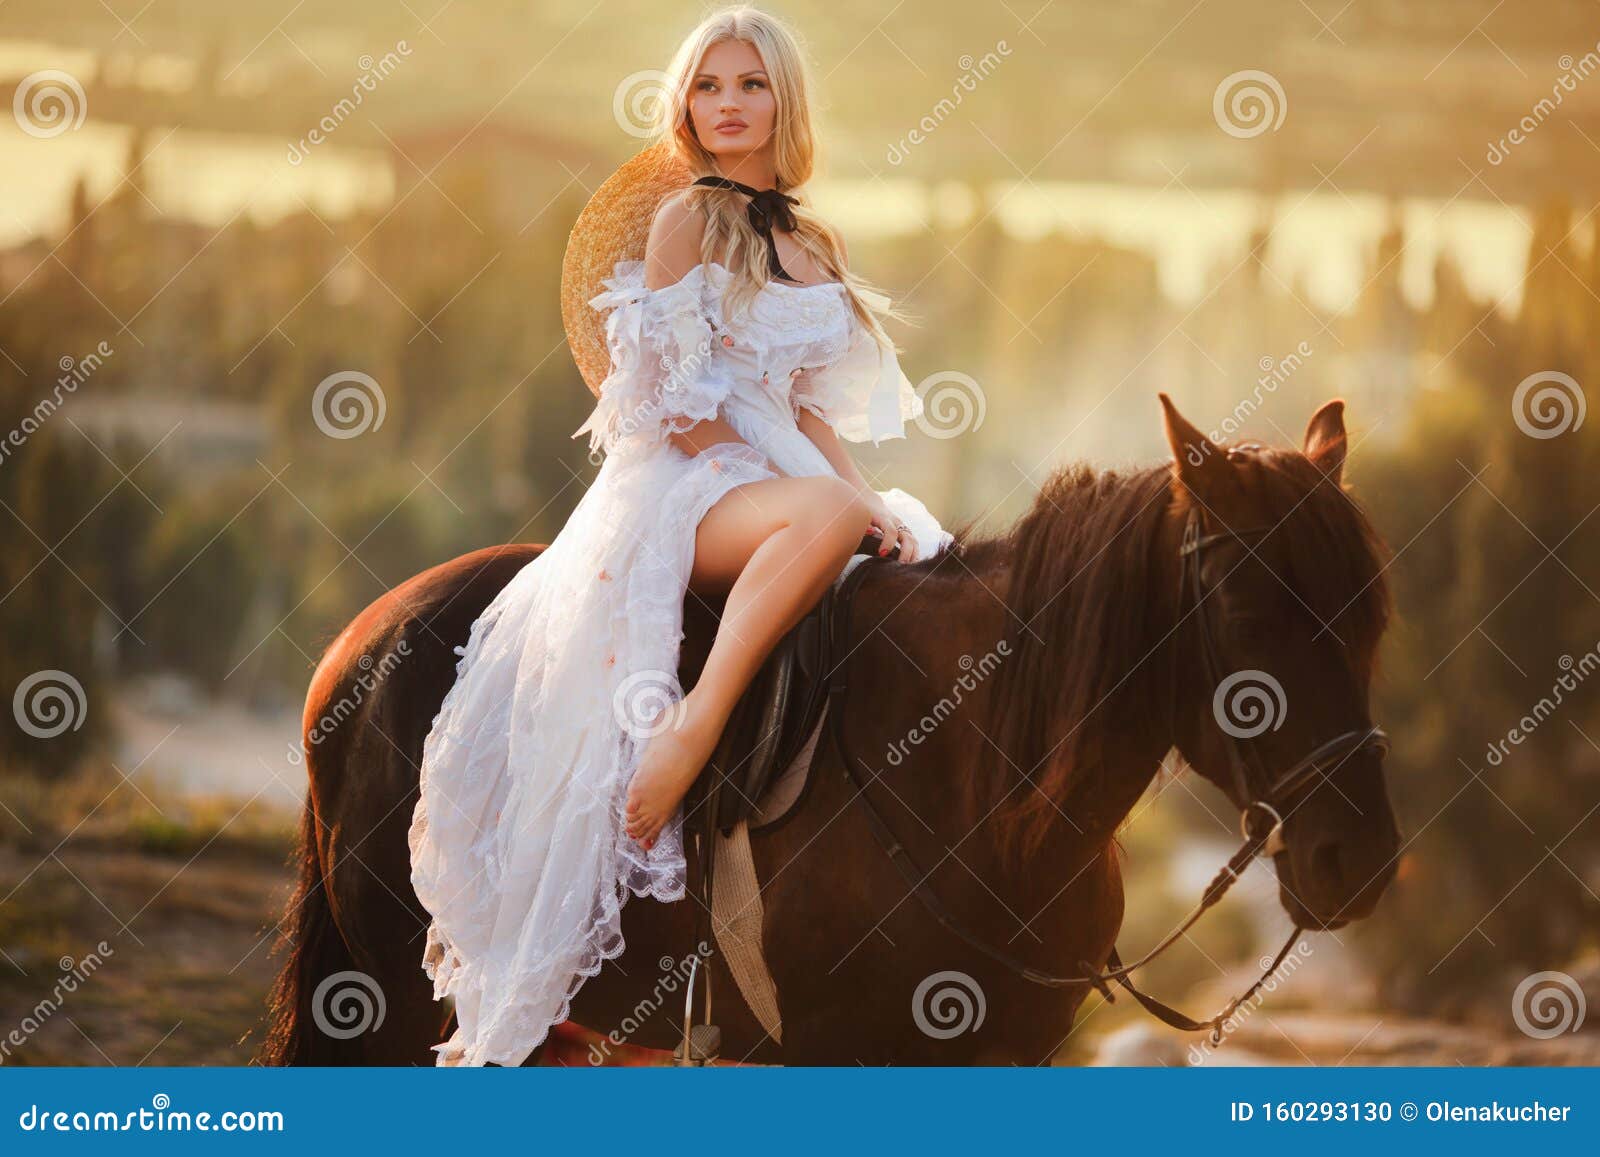 Fashionable Blonde Woman Riding A Horse In Sunny Day Stock Photo